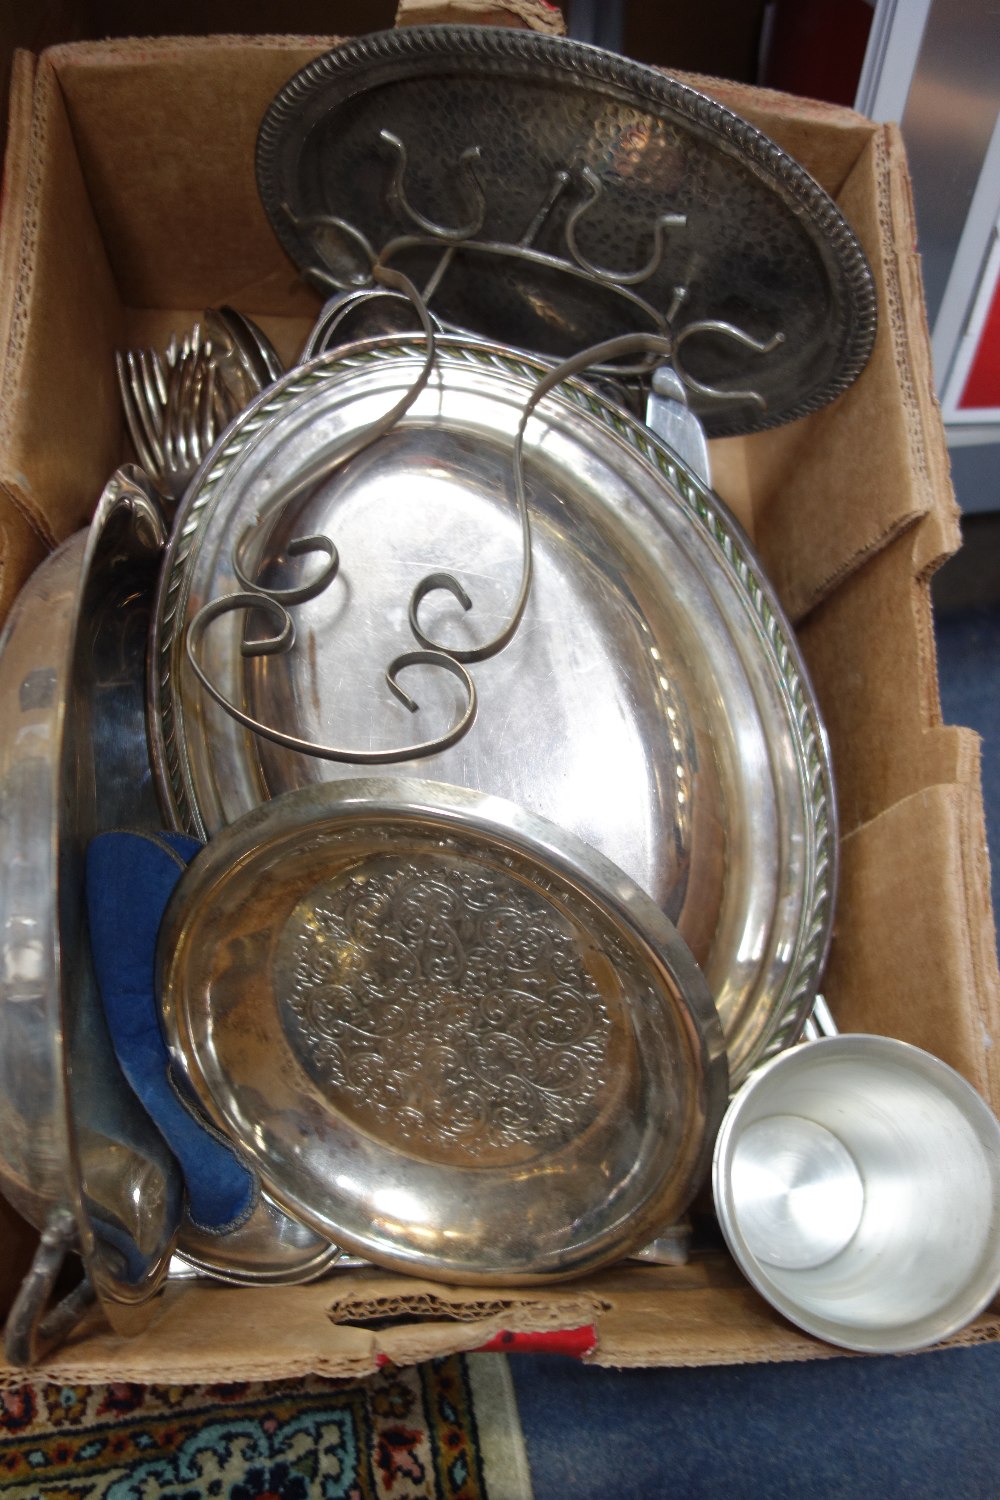 A QUANTITY OF PLATED CUTLERY and similar metalware